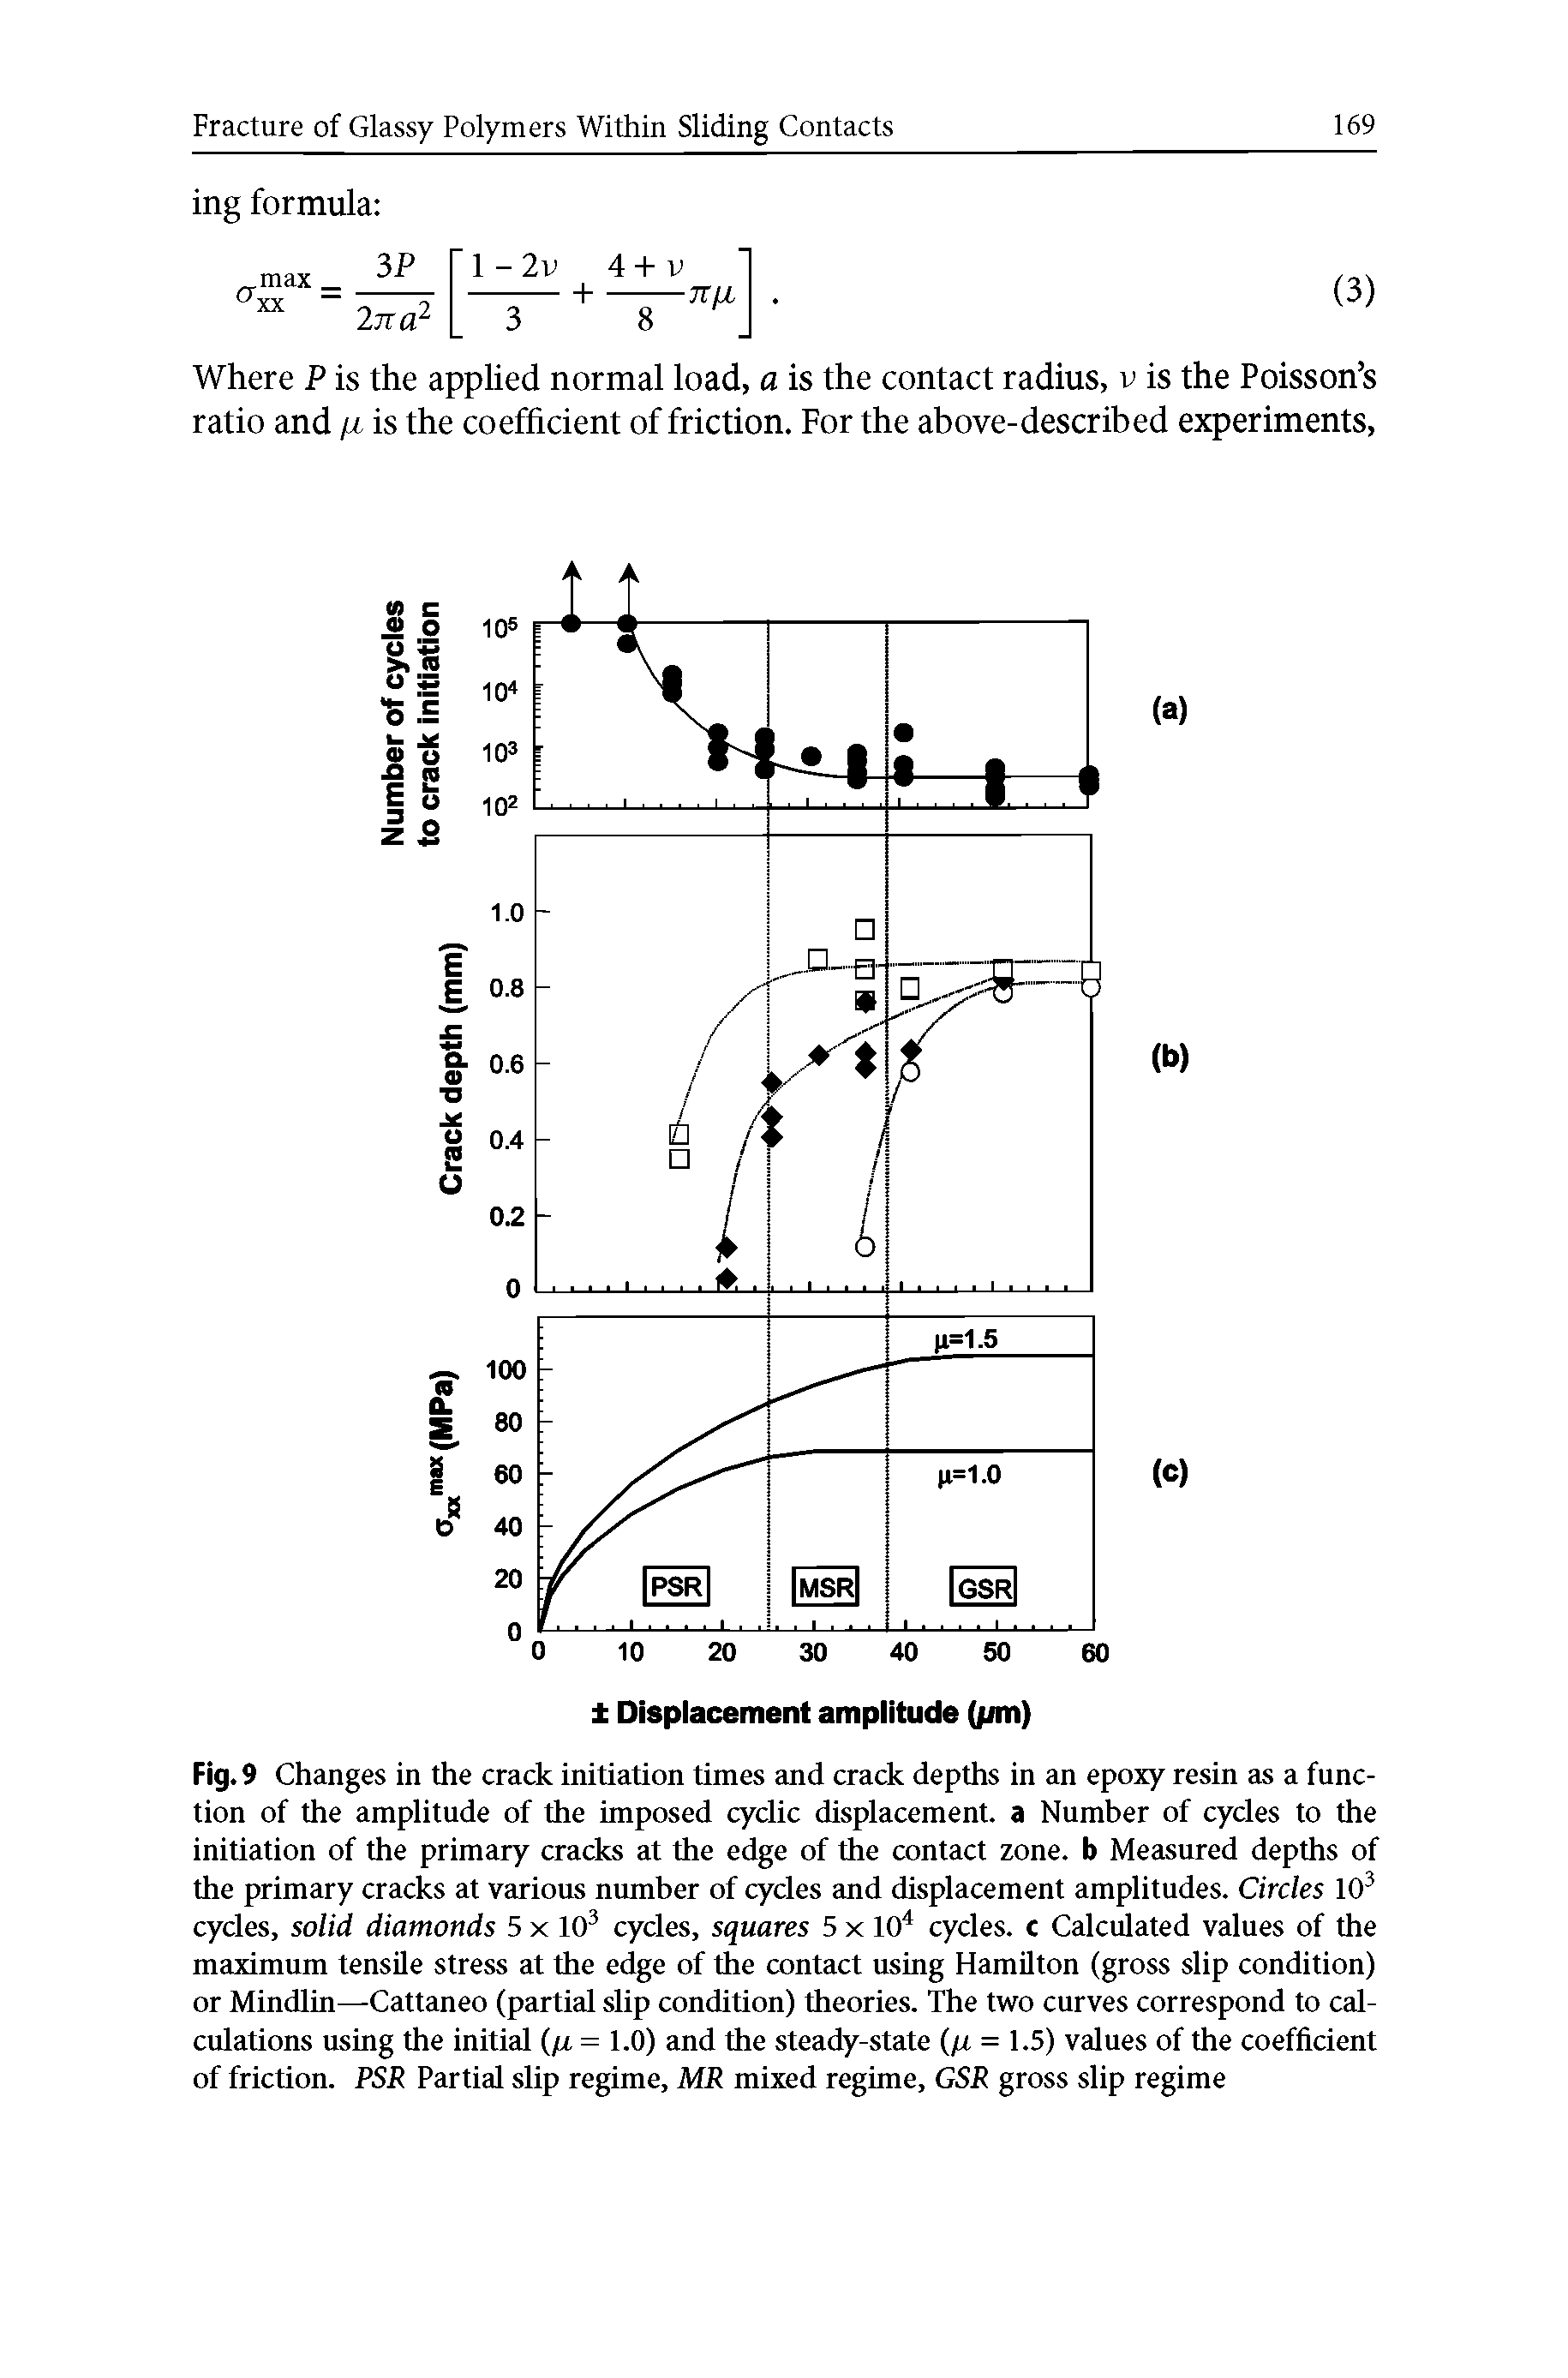 Fig. 9 Changes in the crack initiation times and crack depths in an epoxy resin as a function of the amplitude of the imposed cyclic displacement, a Number of cycles to the initiation of the primary cracks at the edge of the contact zone, b Measured depths of the primary cracks at various number of cycles and displacement amplitudes. Circles 103 cycles, solid diamonds 5 x 103 cycles, squares 5 x 104 cycles, c Calculated values of the maximum tensile stress at the edge of the contact using Hamilton (gross slip condition) or Mindlin—Cattaneo (partial slip condition) theories. The two curves correspond to calculations using the initial (/x = 1.0) and the steady-state (/x = 1.5) values of the coefficient of friction. PSR Partial slip regime, MR mixed regime, GSR gross slip regime...